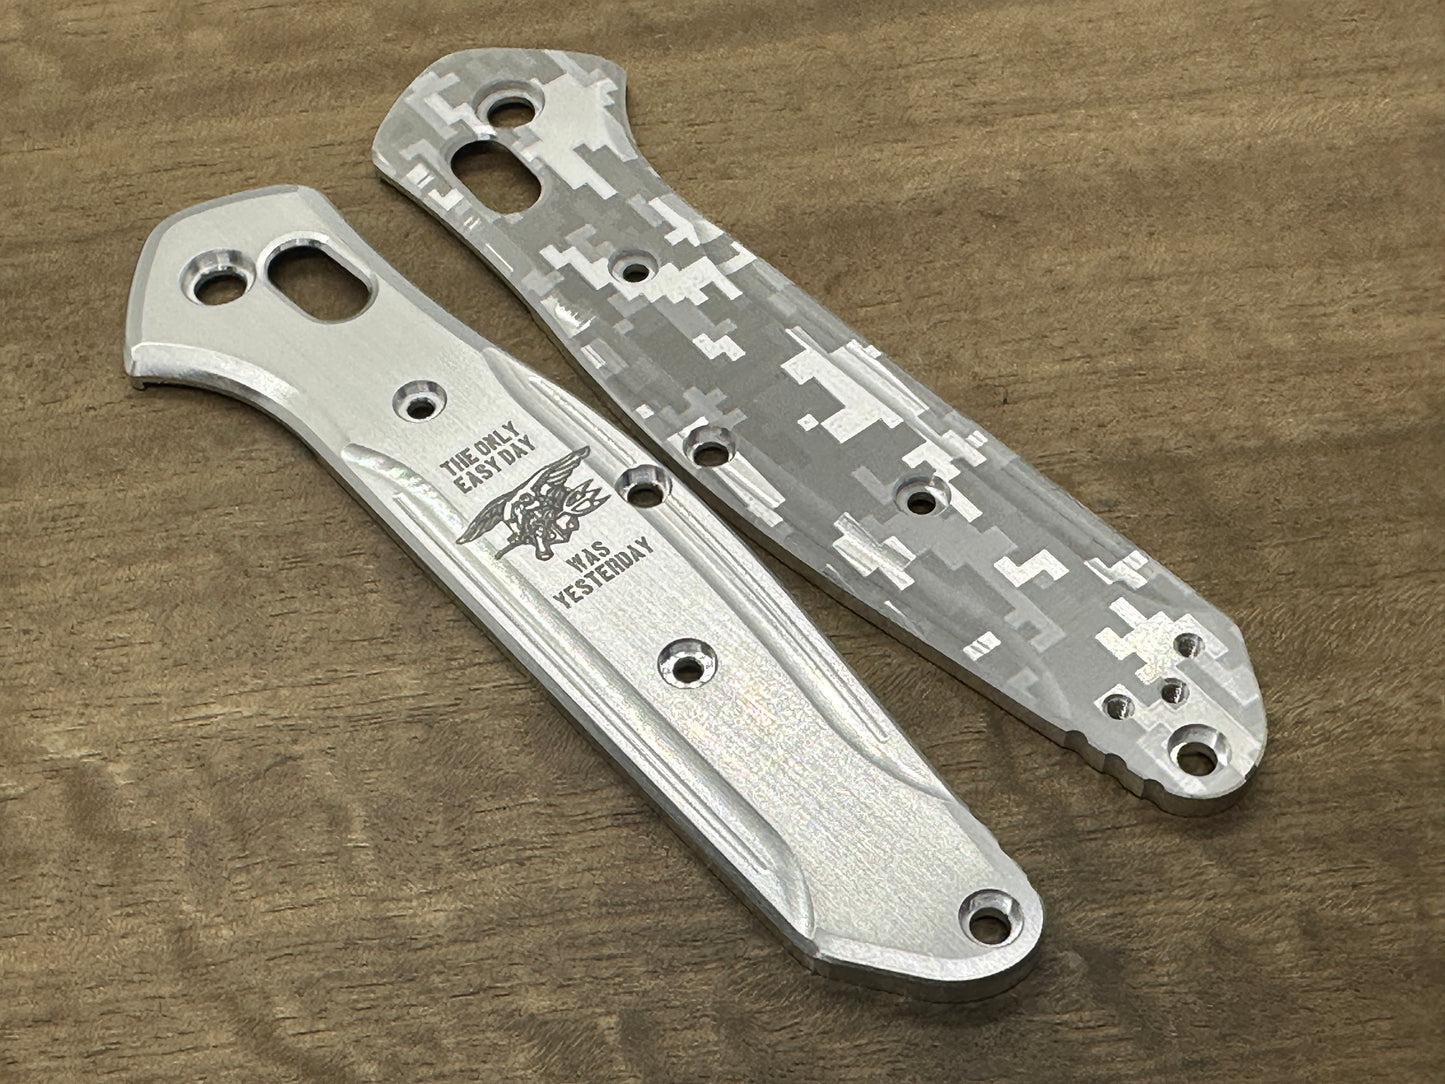 US NAVY Seals The only easy day ... Aluminum Scales for Benchmade 940 Osborne